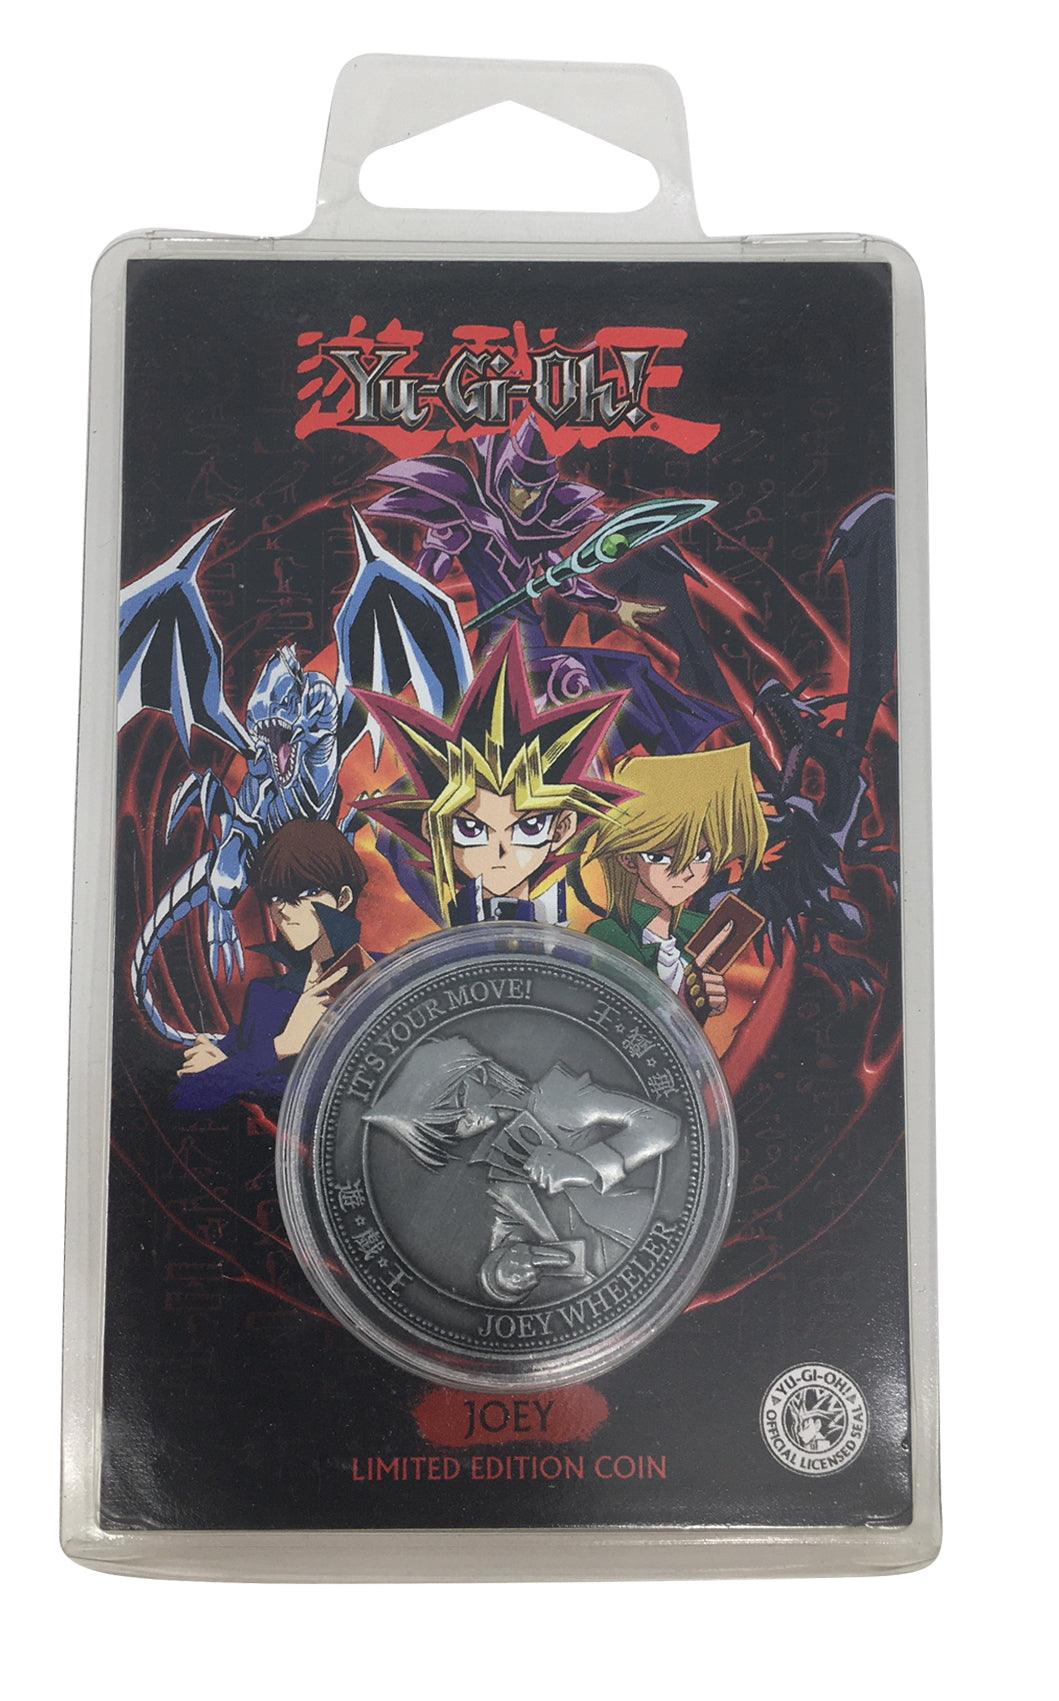 Coin Yugioh Joey - Want a New Gadget